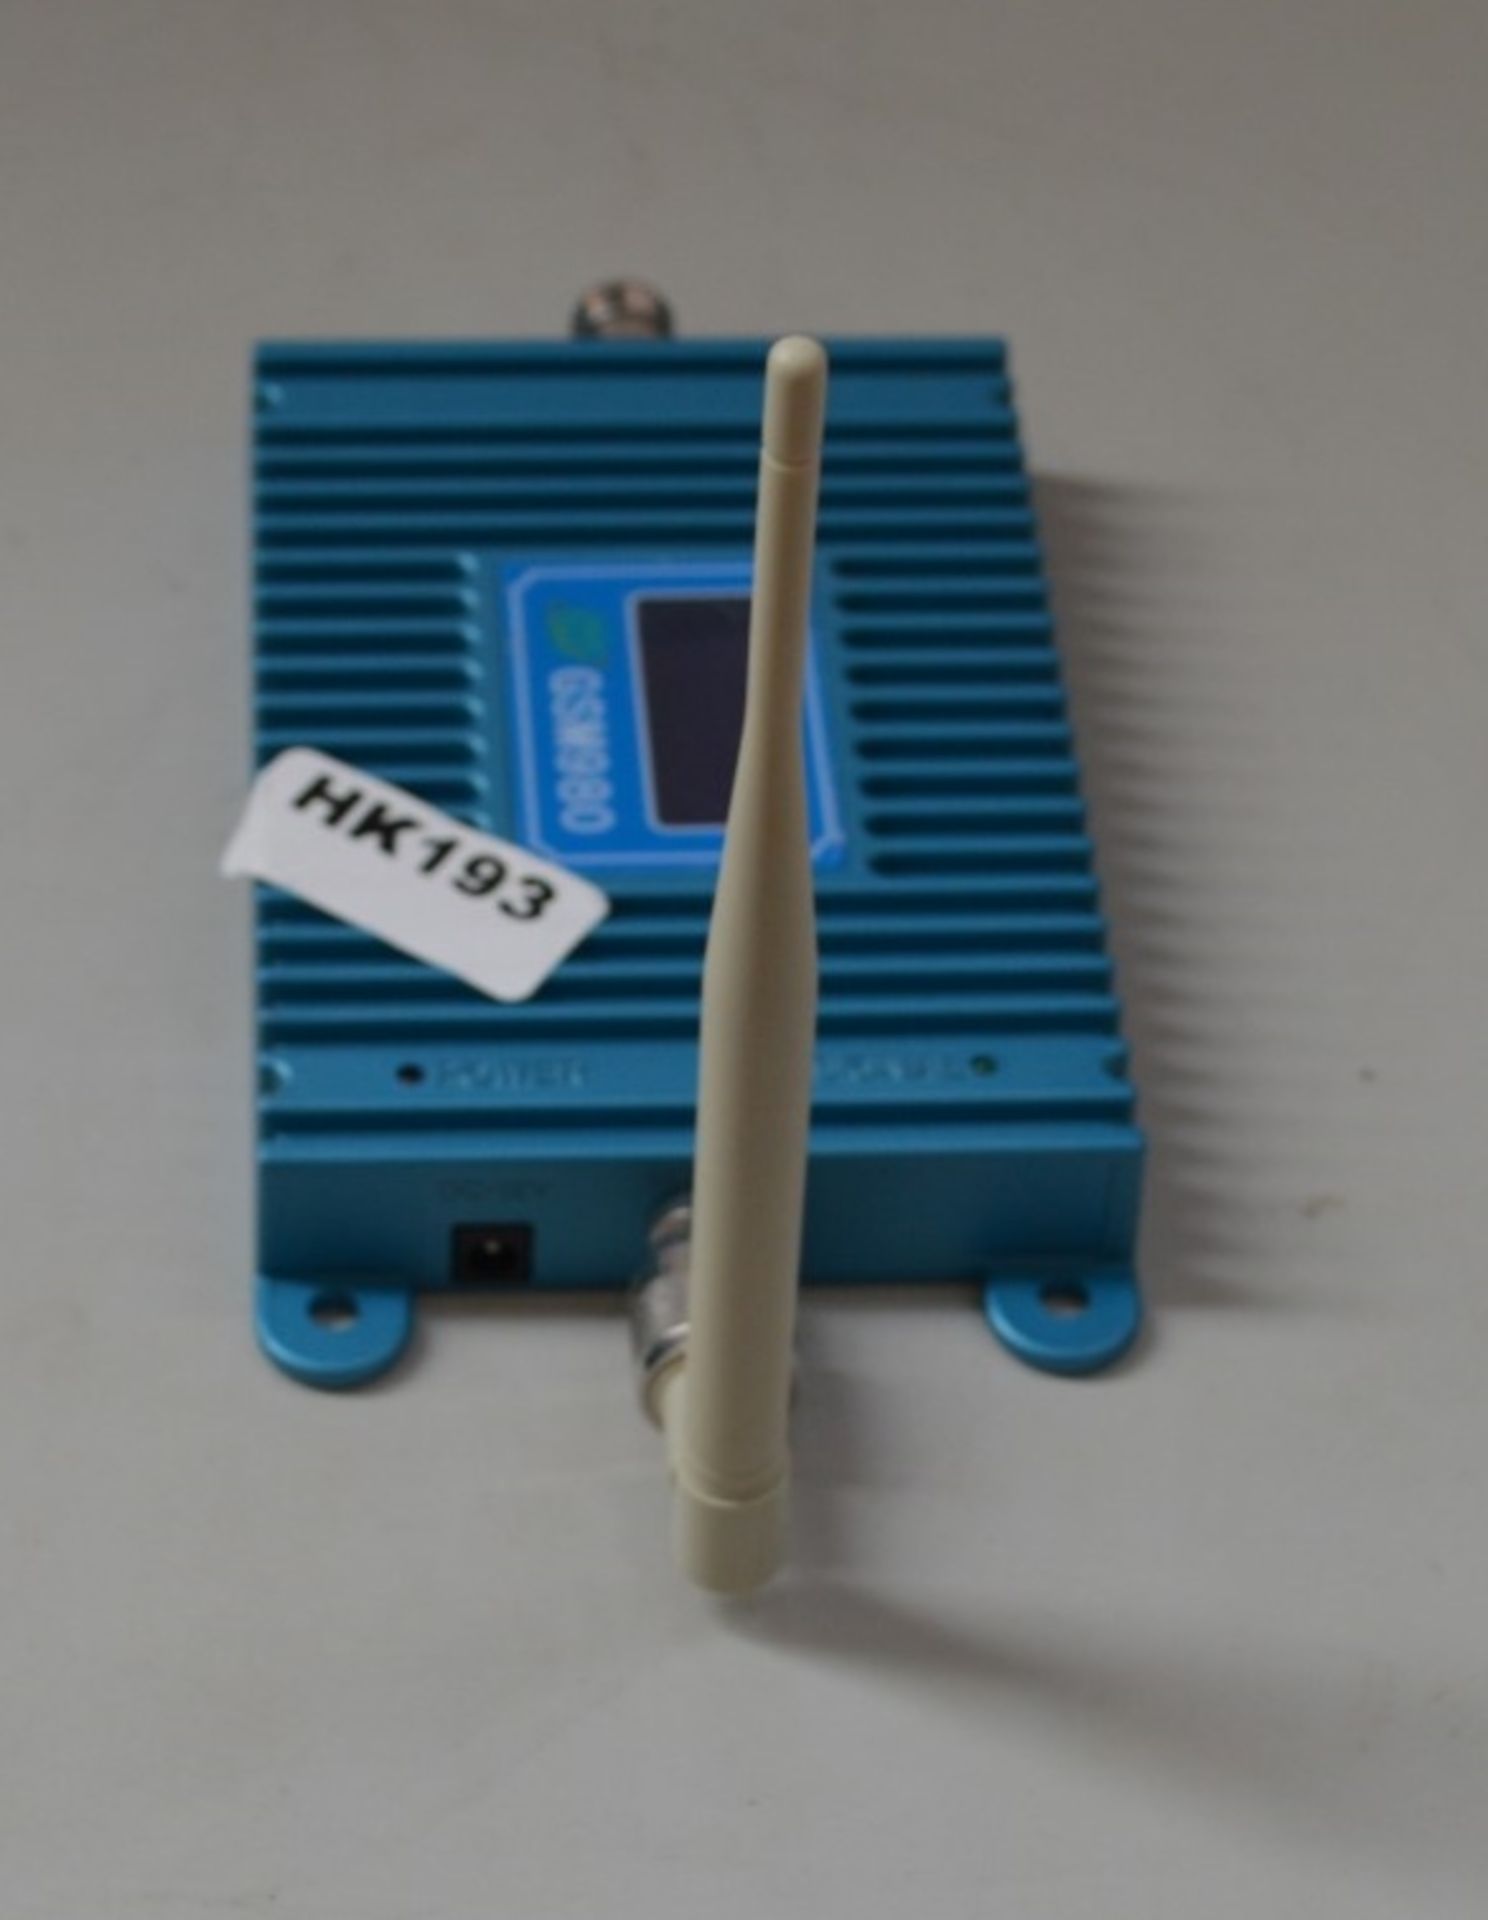 1 x GSM980 GSM 900MHz Mobile Phone Signal Booster - Ref HK193 - Image 2 of 2